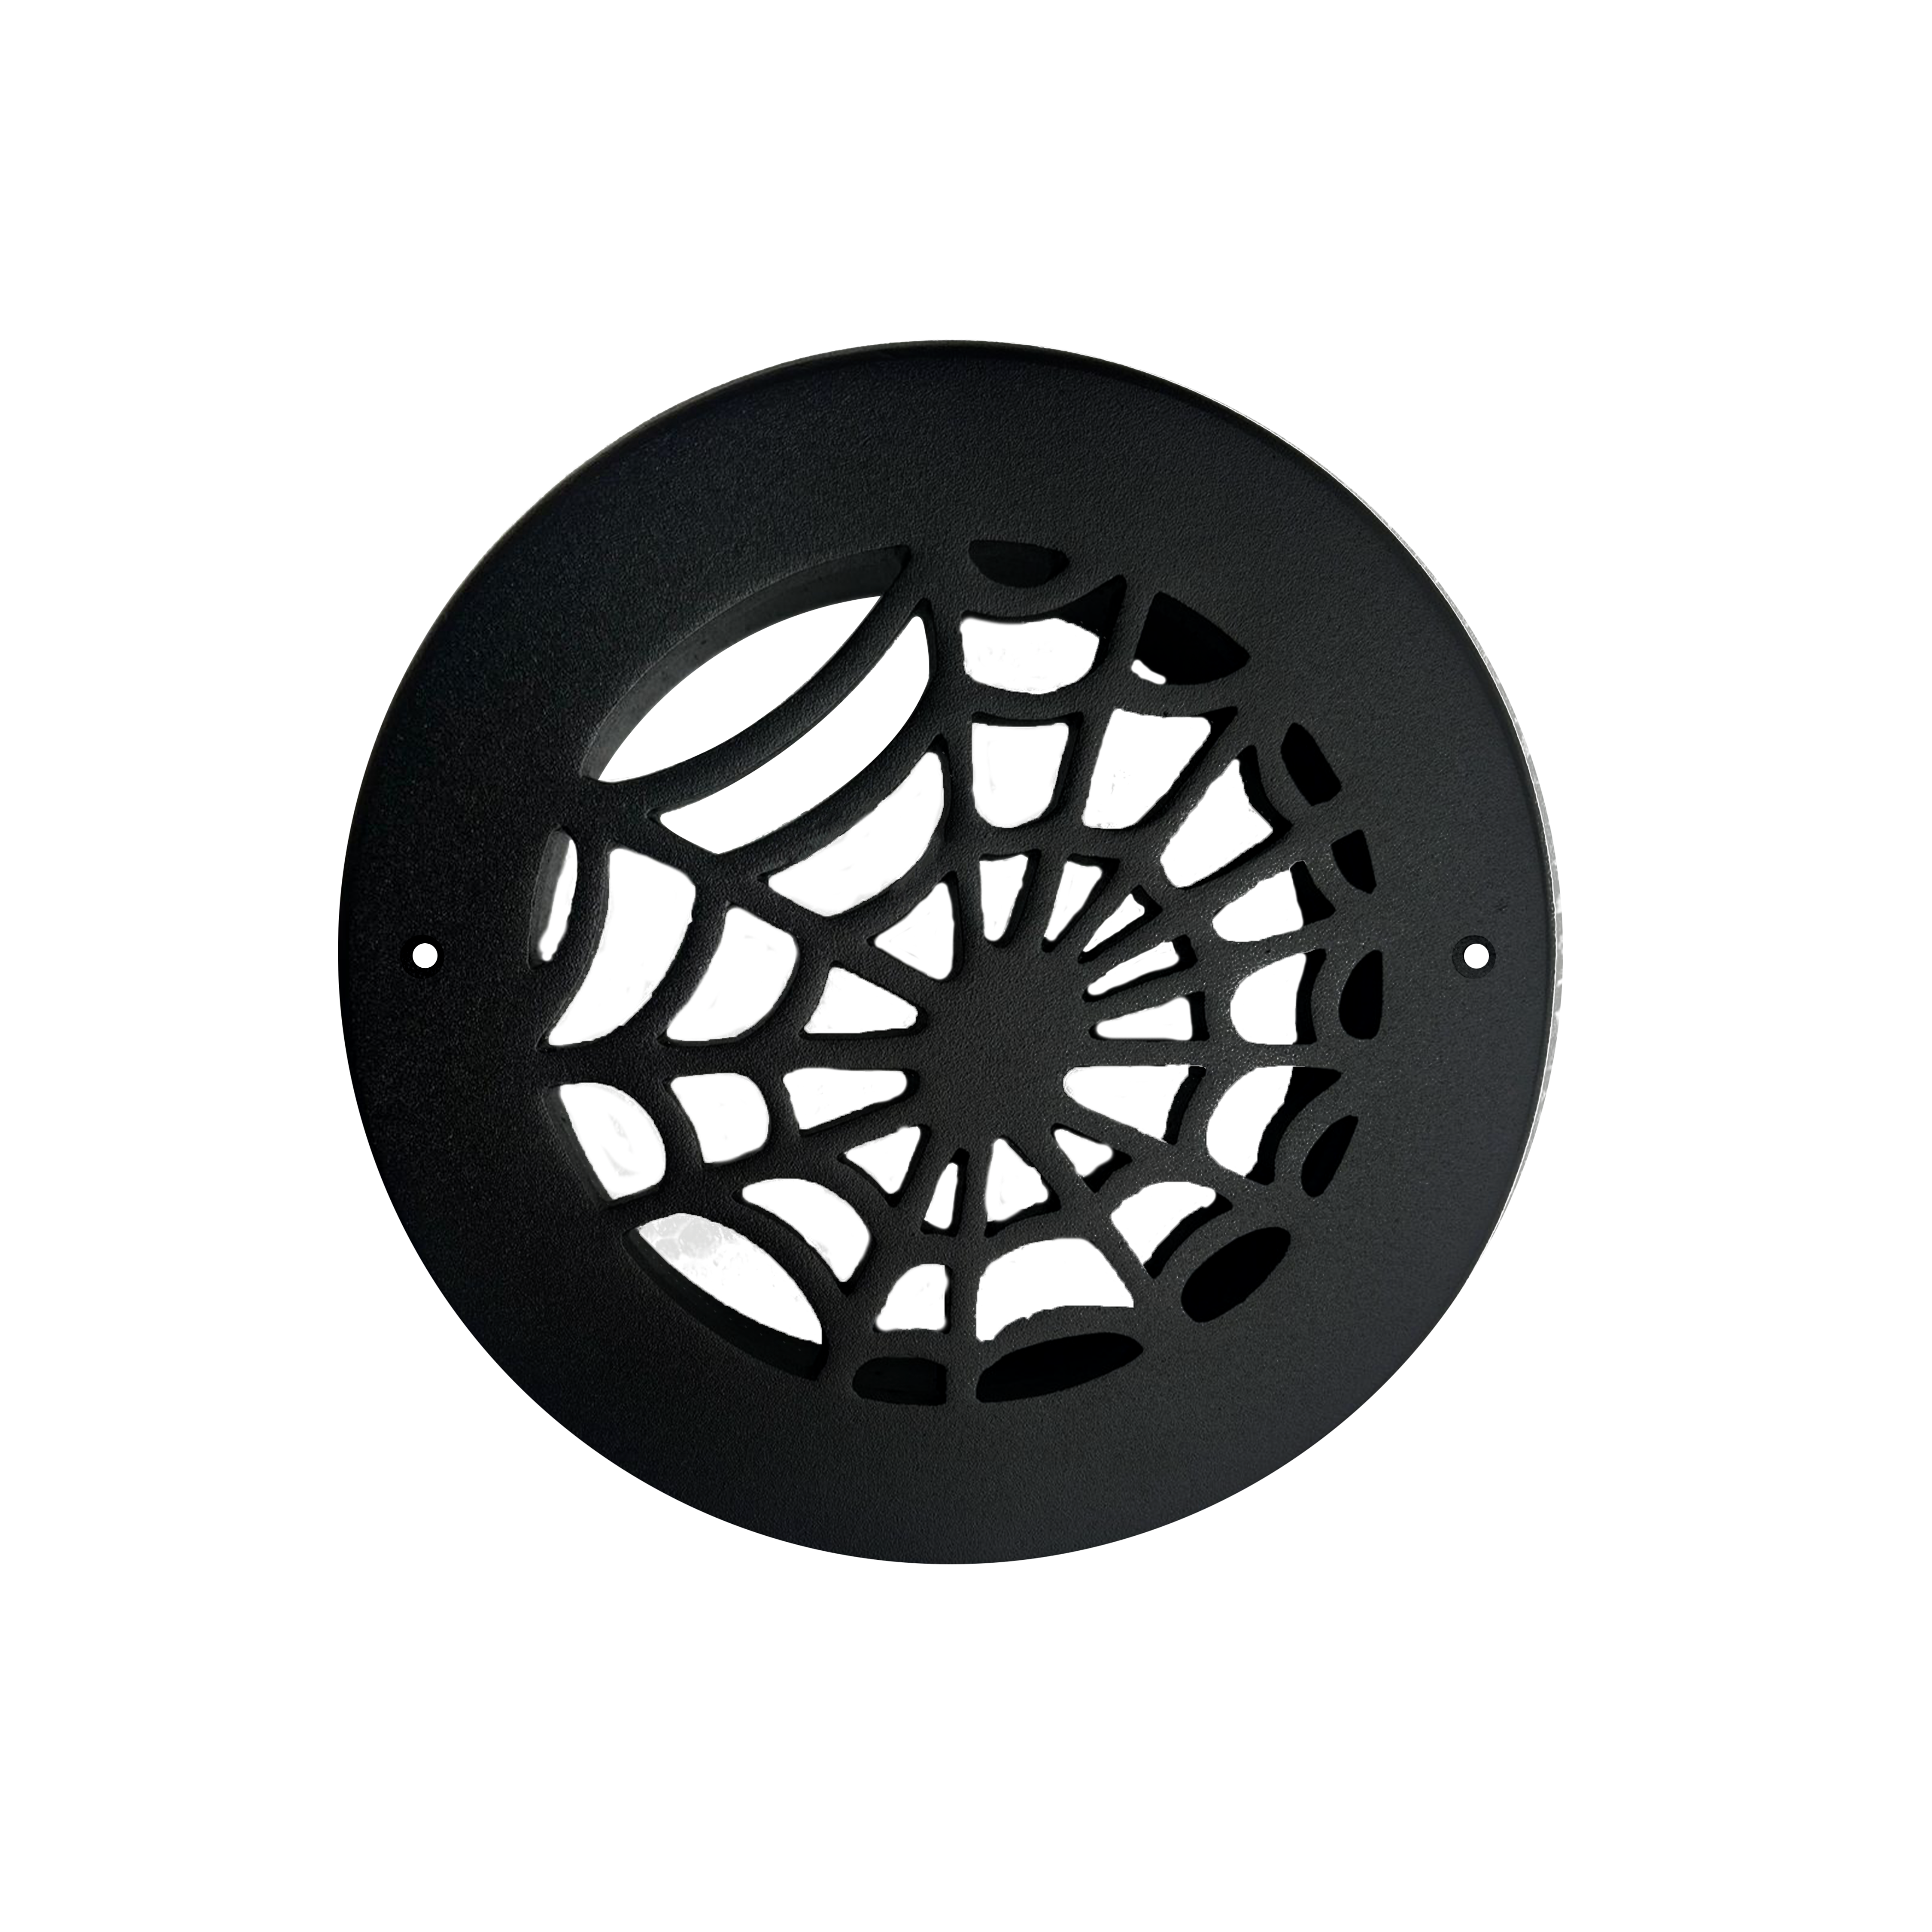 Spooky Gothic Round Vent cover 6" Duct Opening (Overall 7-1/2") in Spider Web Design | Solid Cast Aluminium Register Cover | Powder Coated